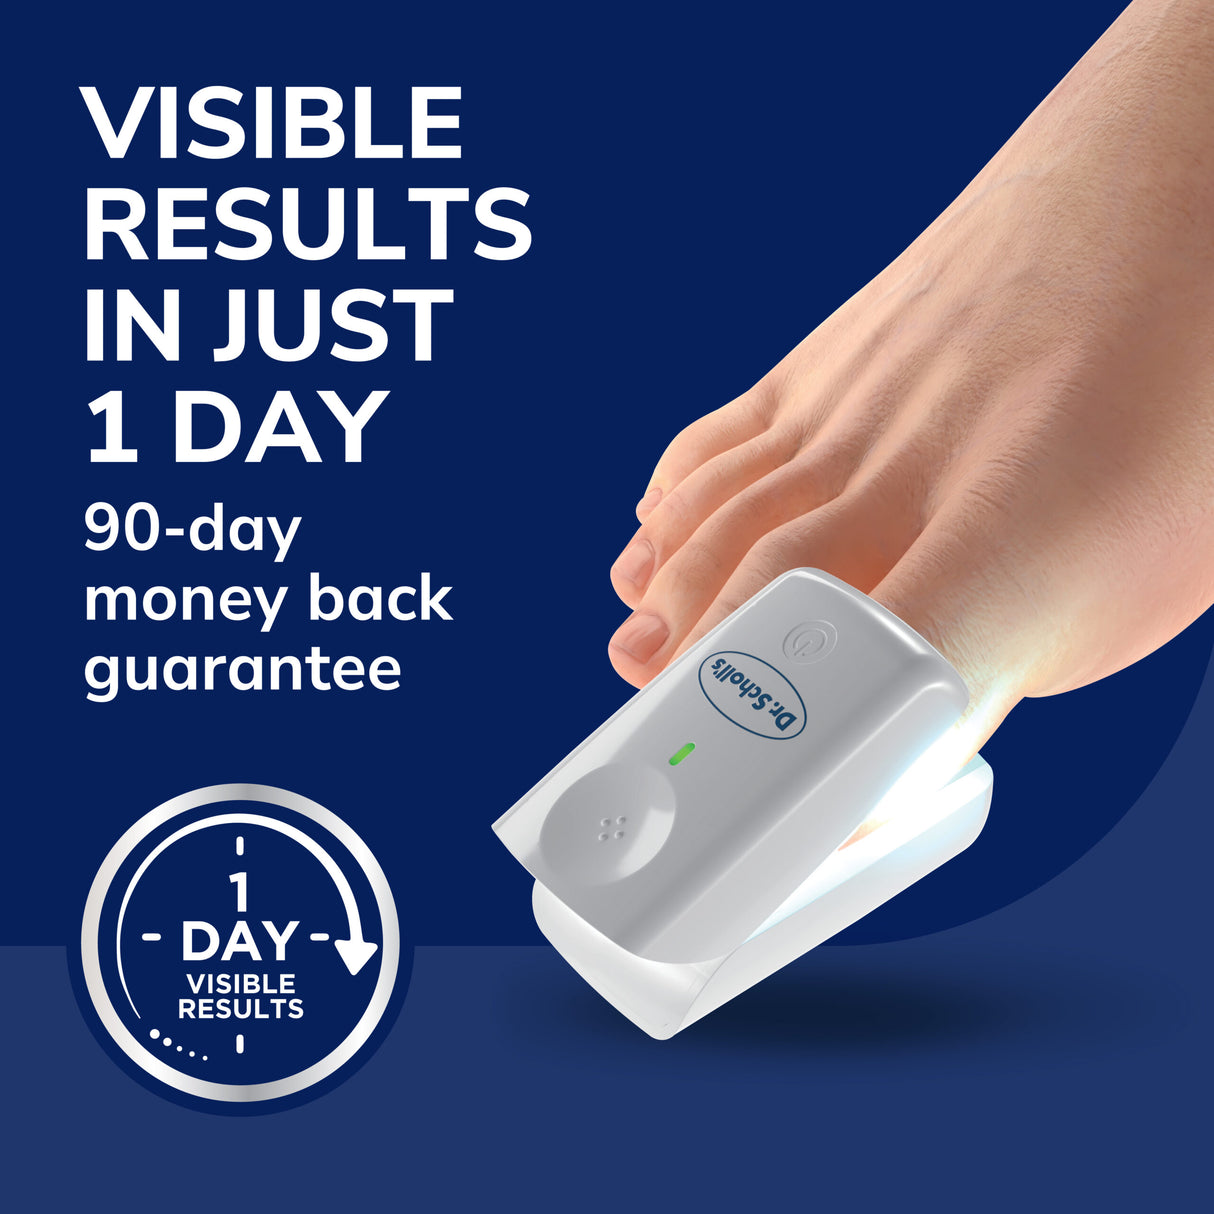 image of visible results in just 1 day 90 day money back guarentee